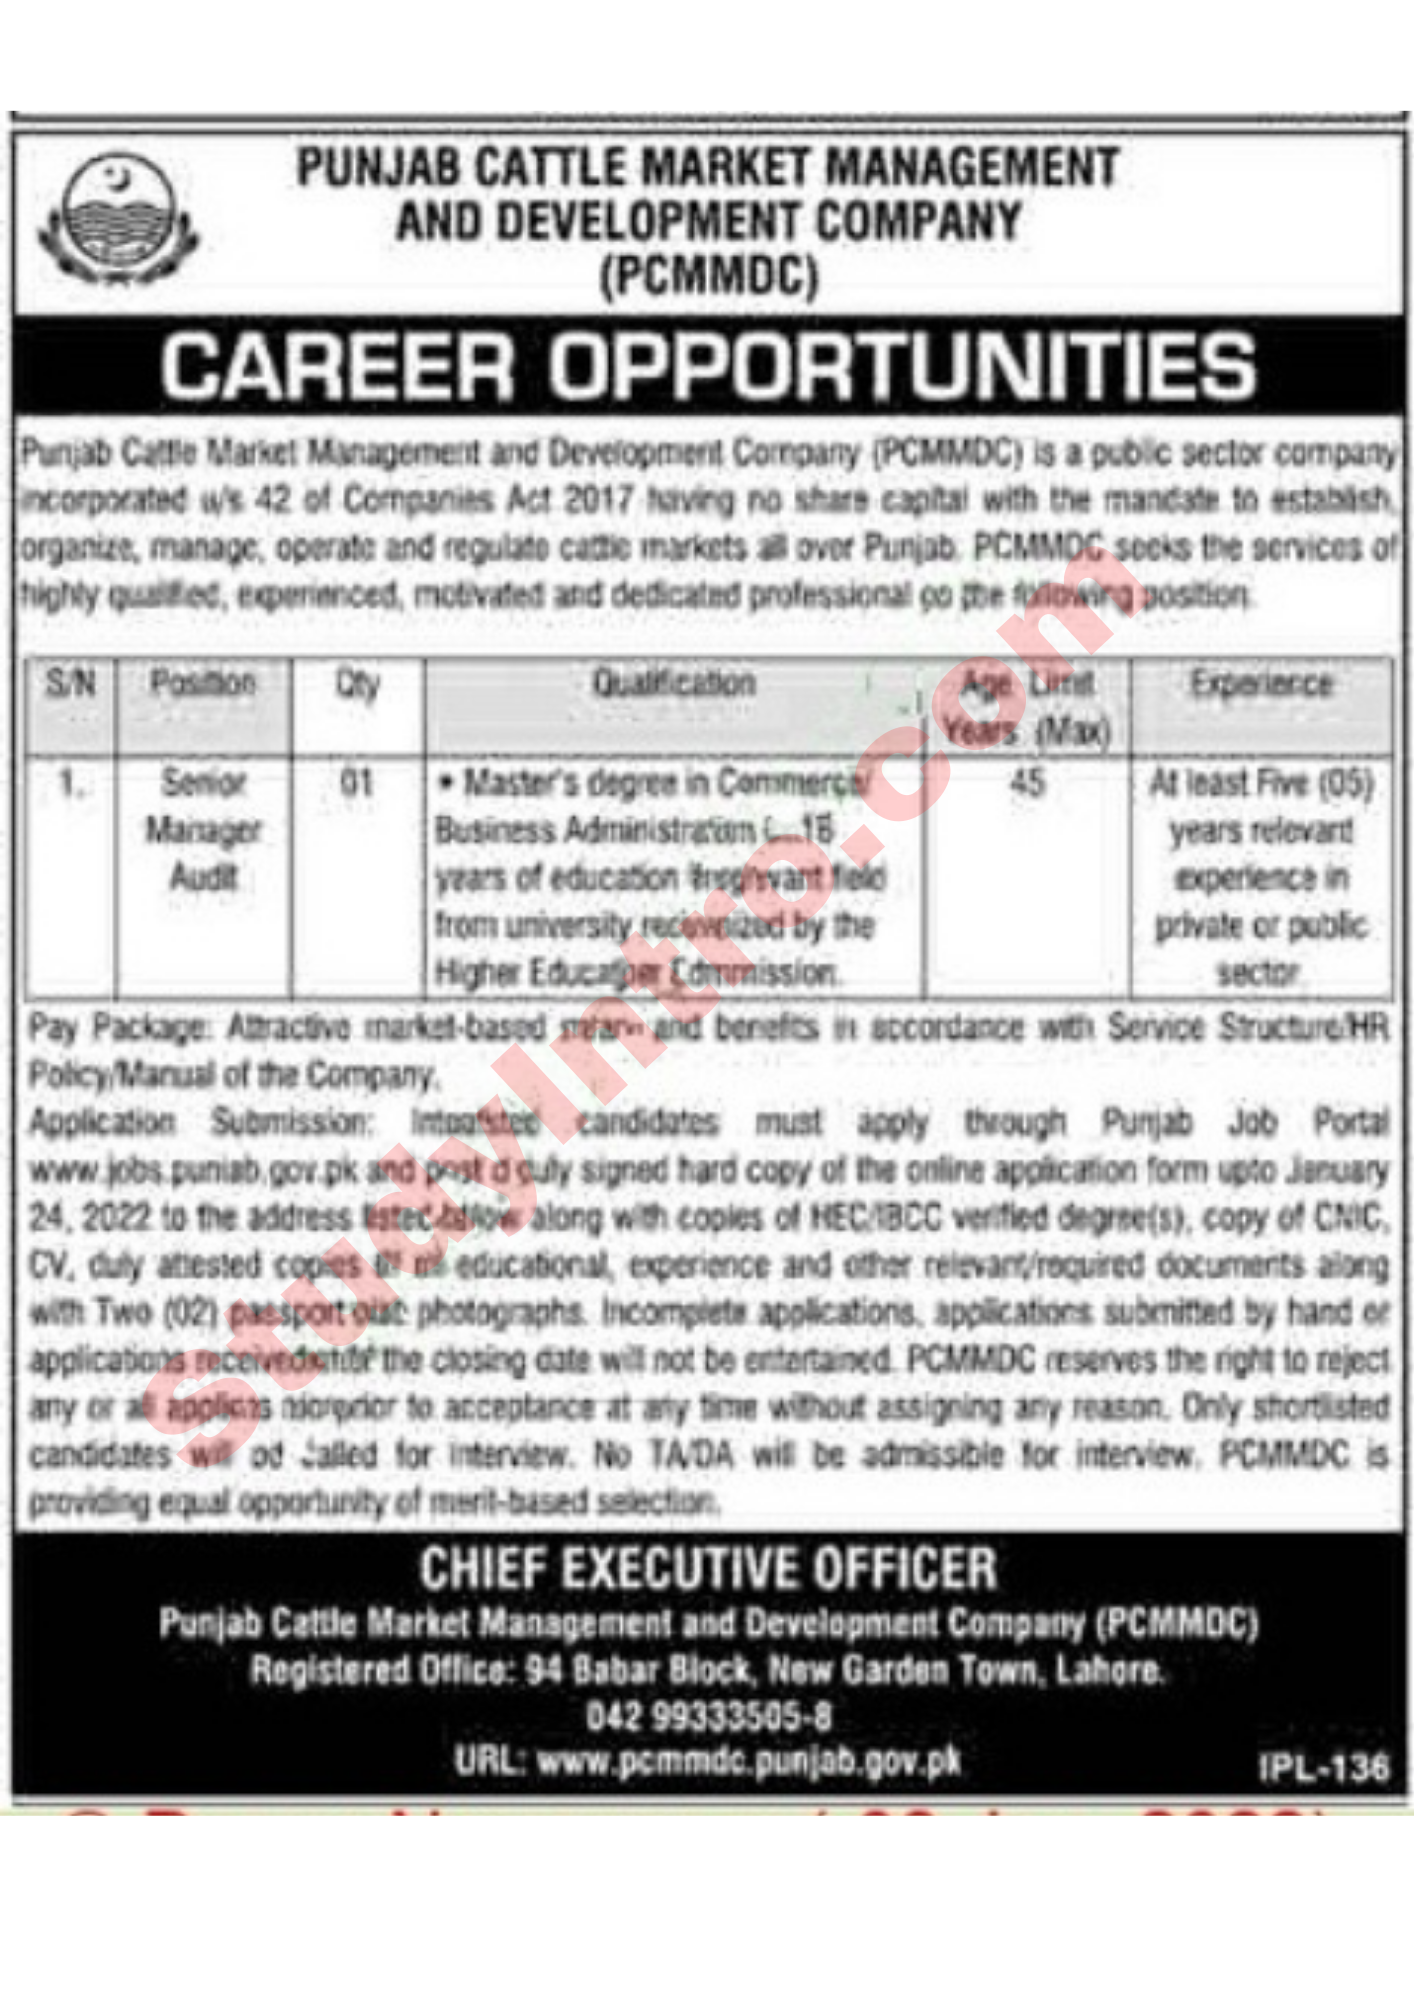 Senior Manager Jobs in PCMMDC 2022-Apply Now